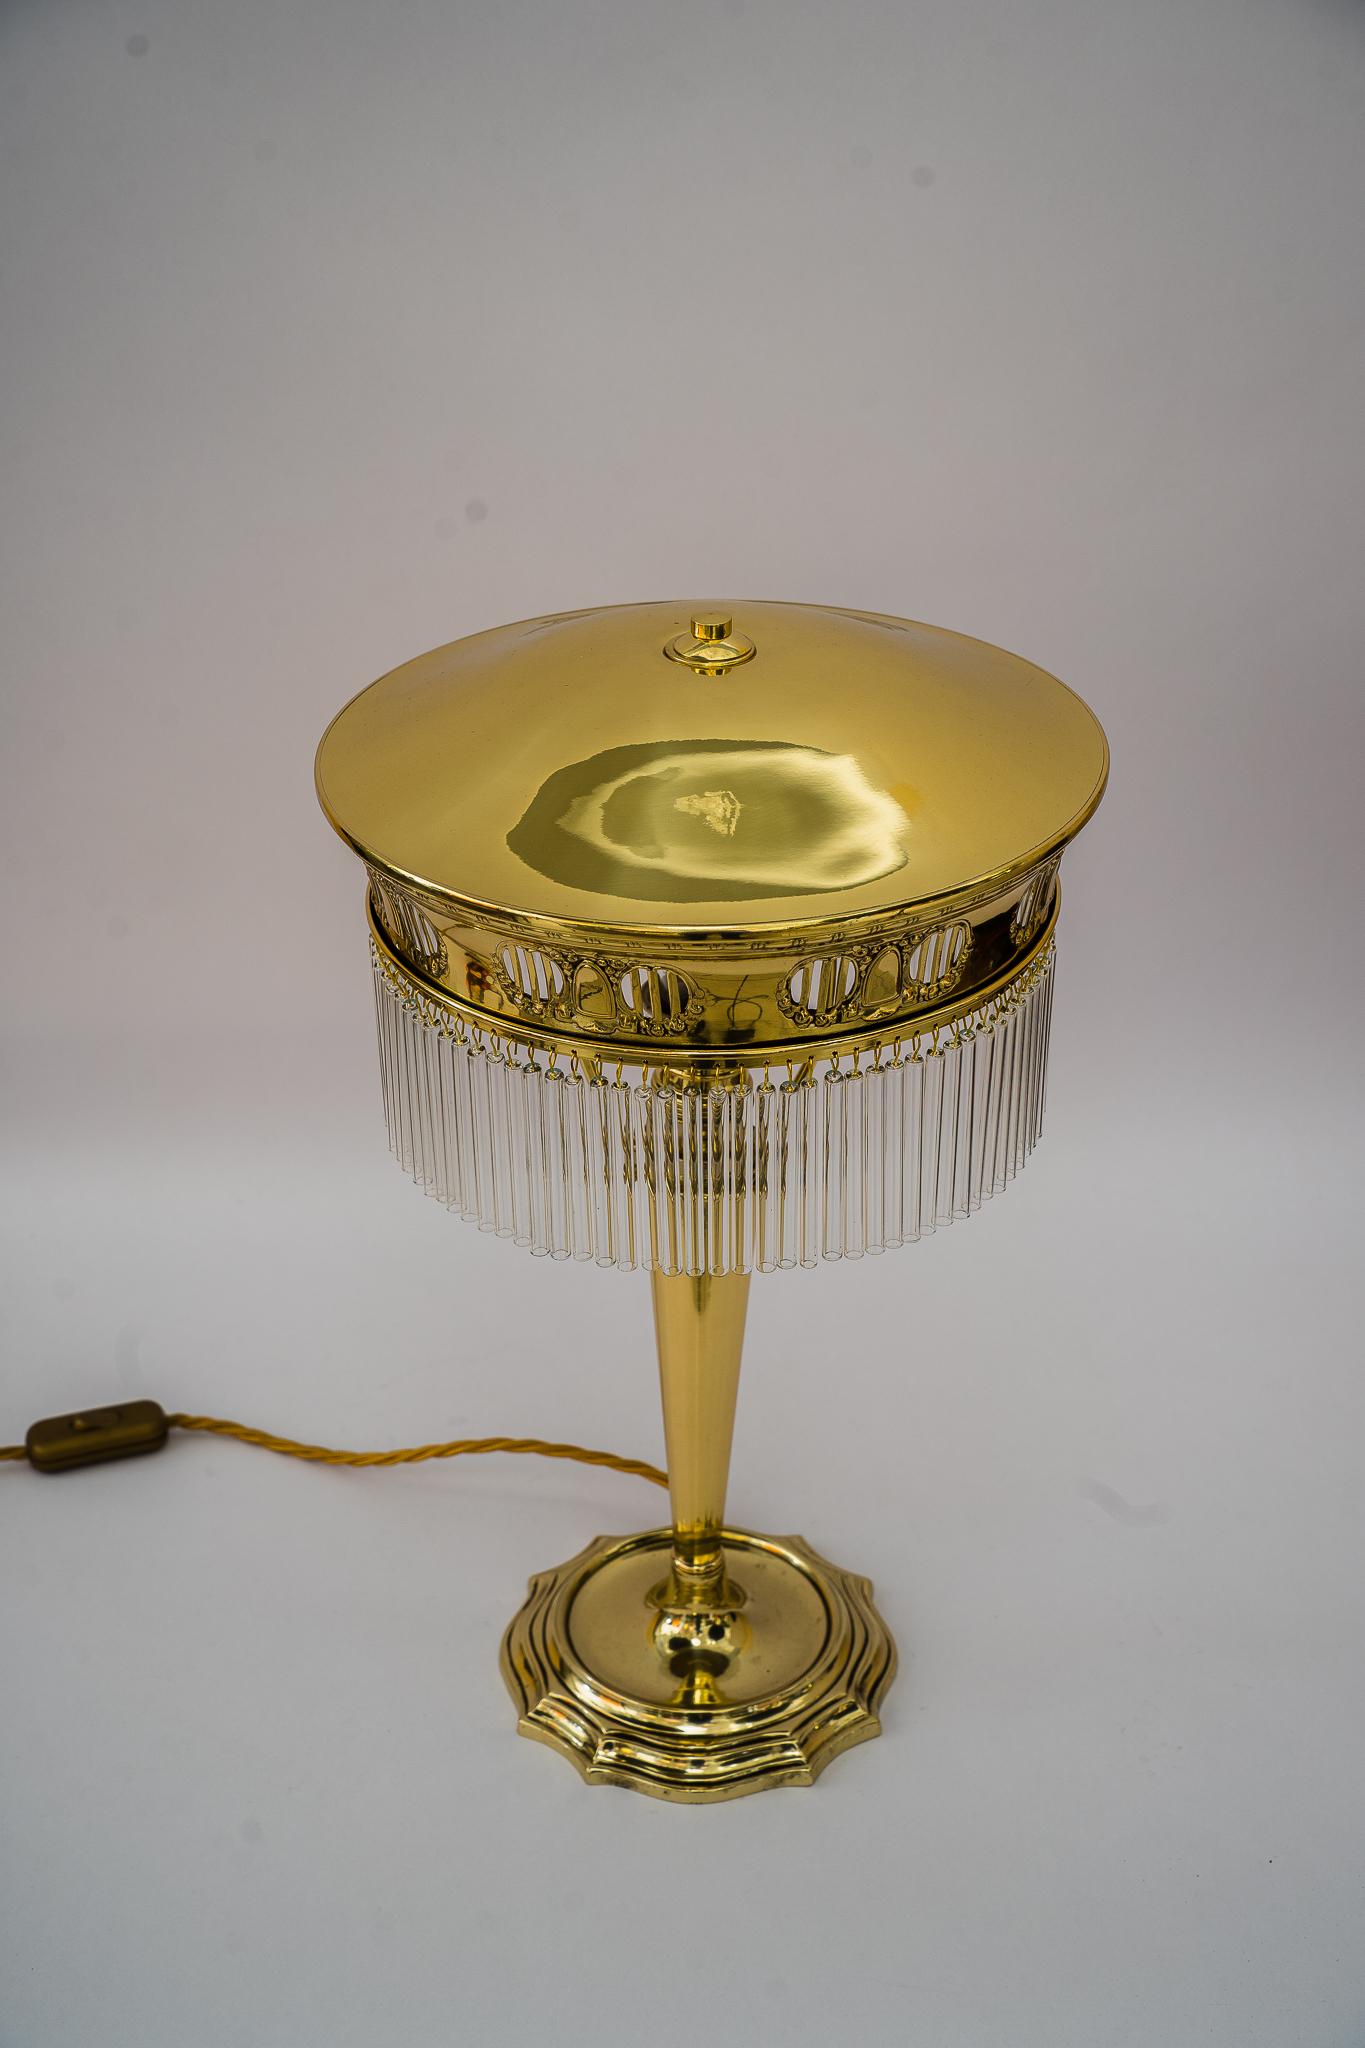 Art Deco Table lamp vienna 1920s
Polished and stove enameled
The glass sticks are replaced ( new )